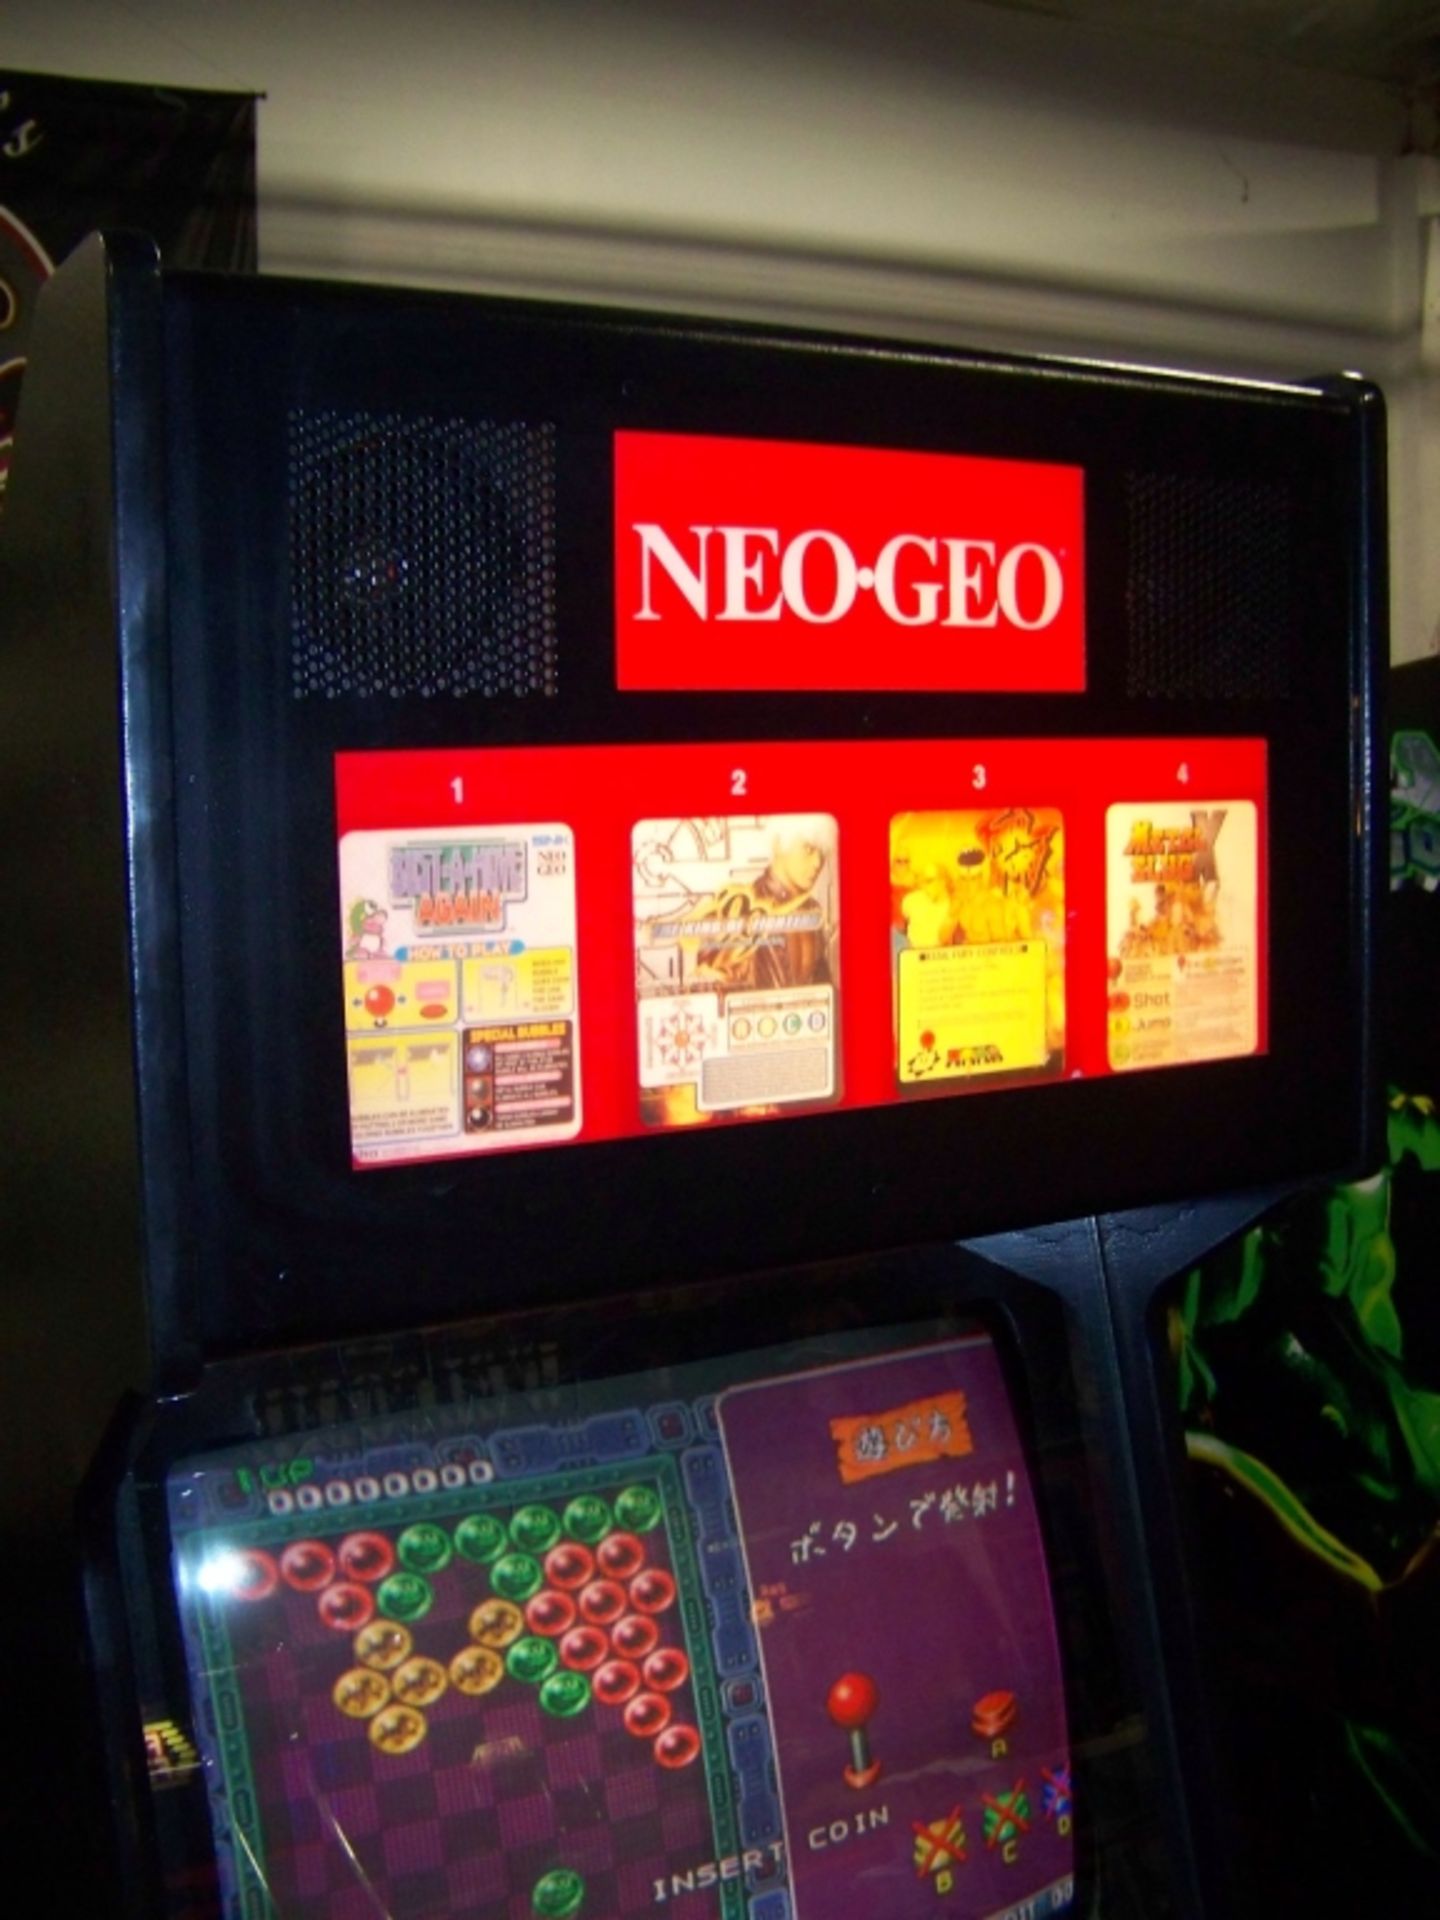 NEO GEO 4 SLOT SNK ARCADE GAME CABINET - Image 5 of 5